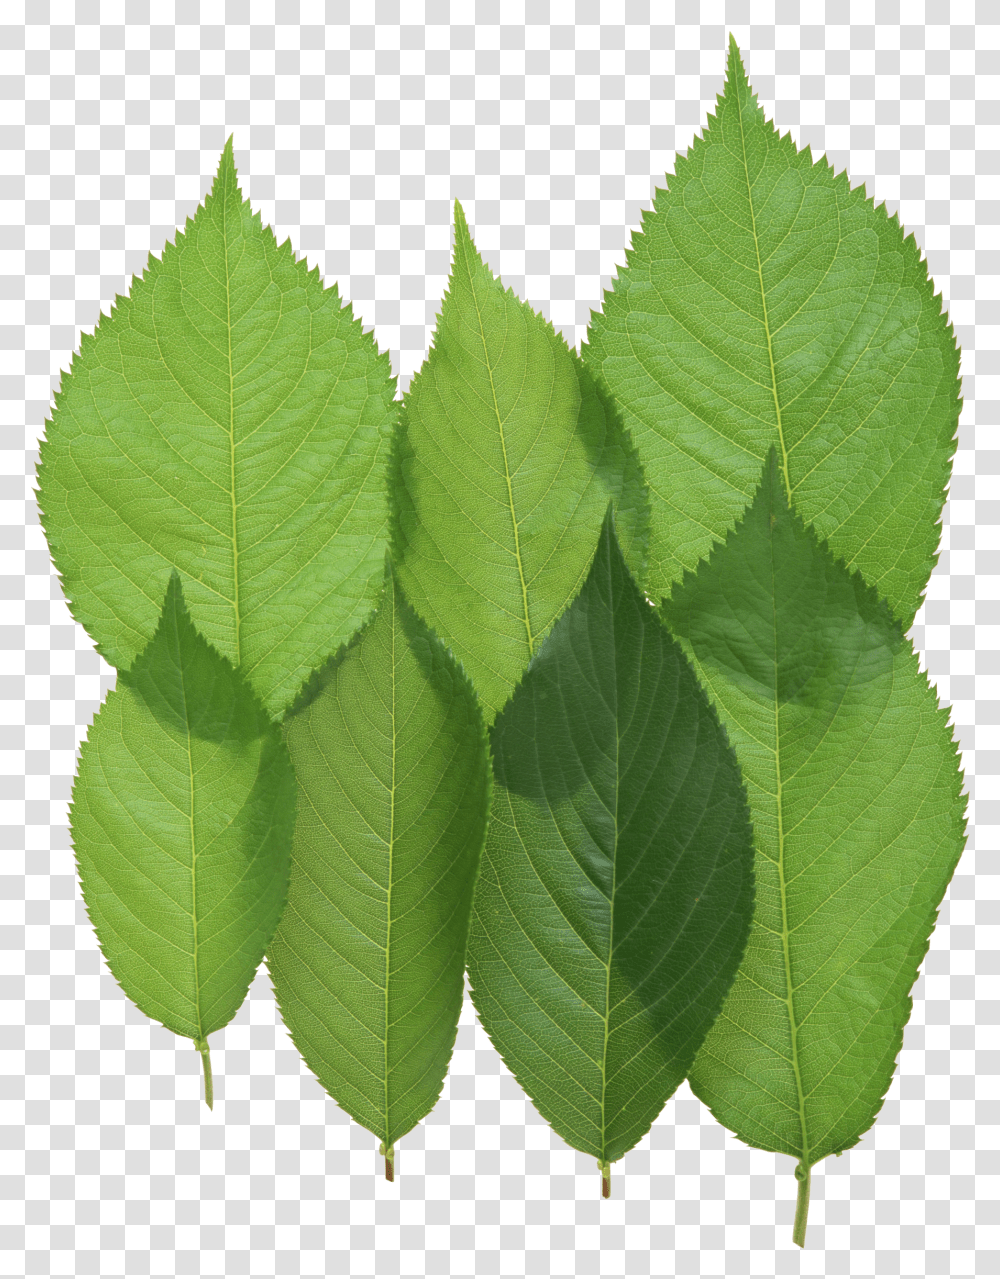 Download Green Leaves Image For Free Walnut Leaves Transparent Png